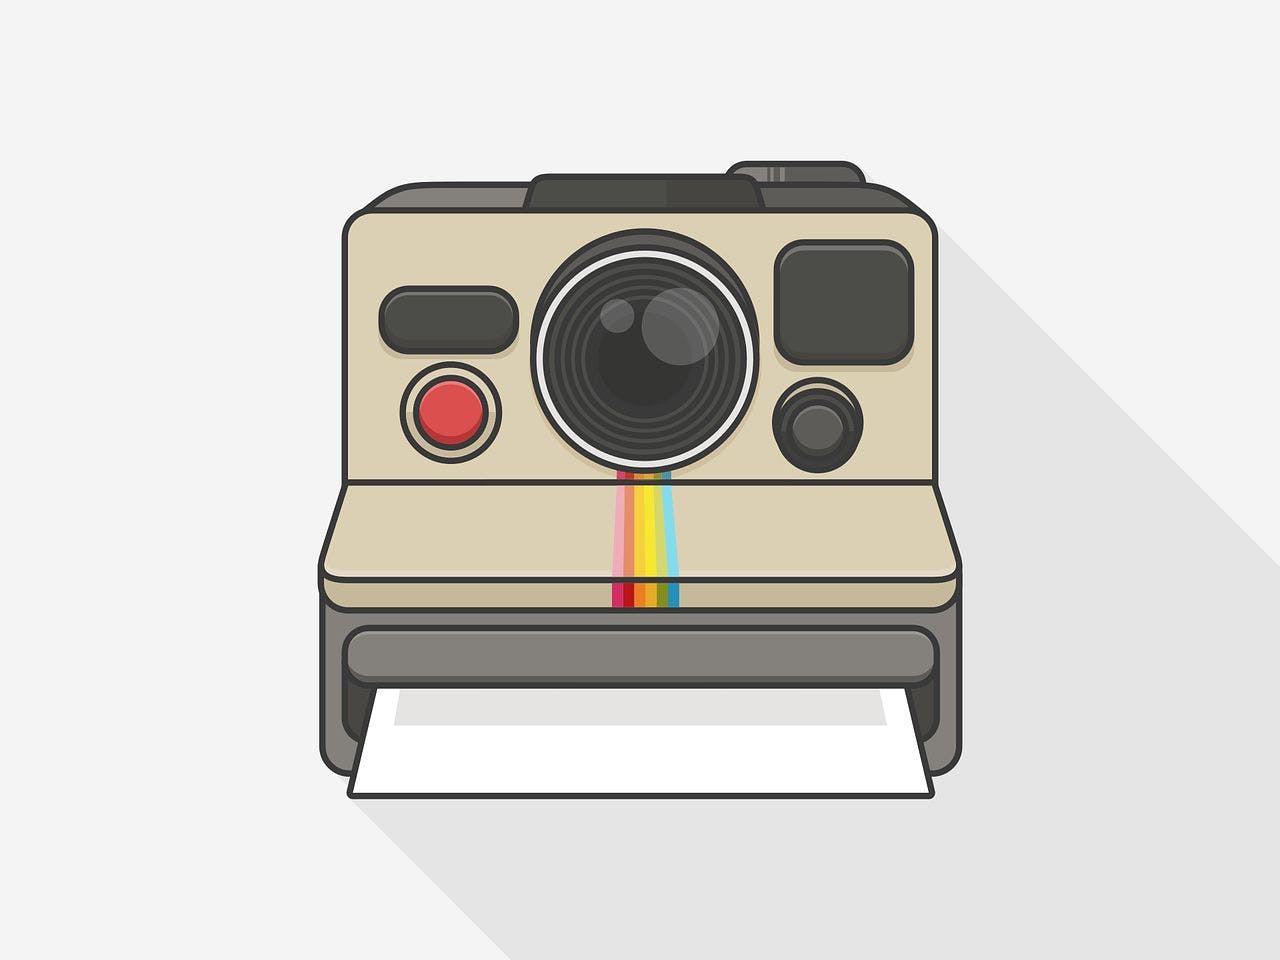 /instagram-marketing-3-common-mistakes-to-avoid feature image